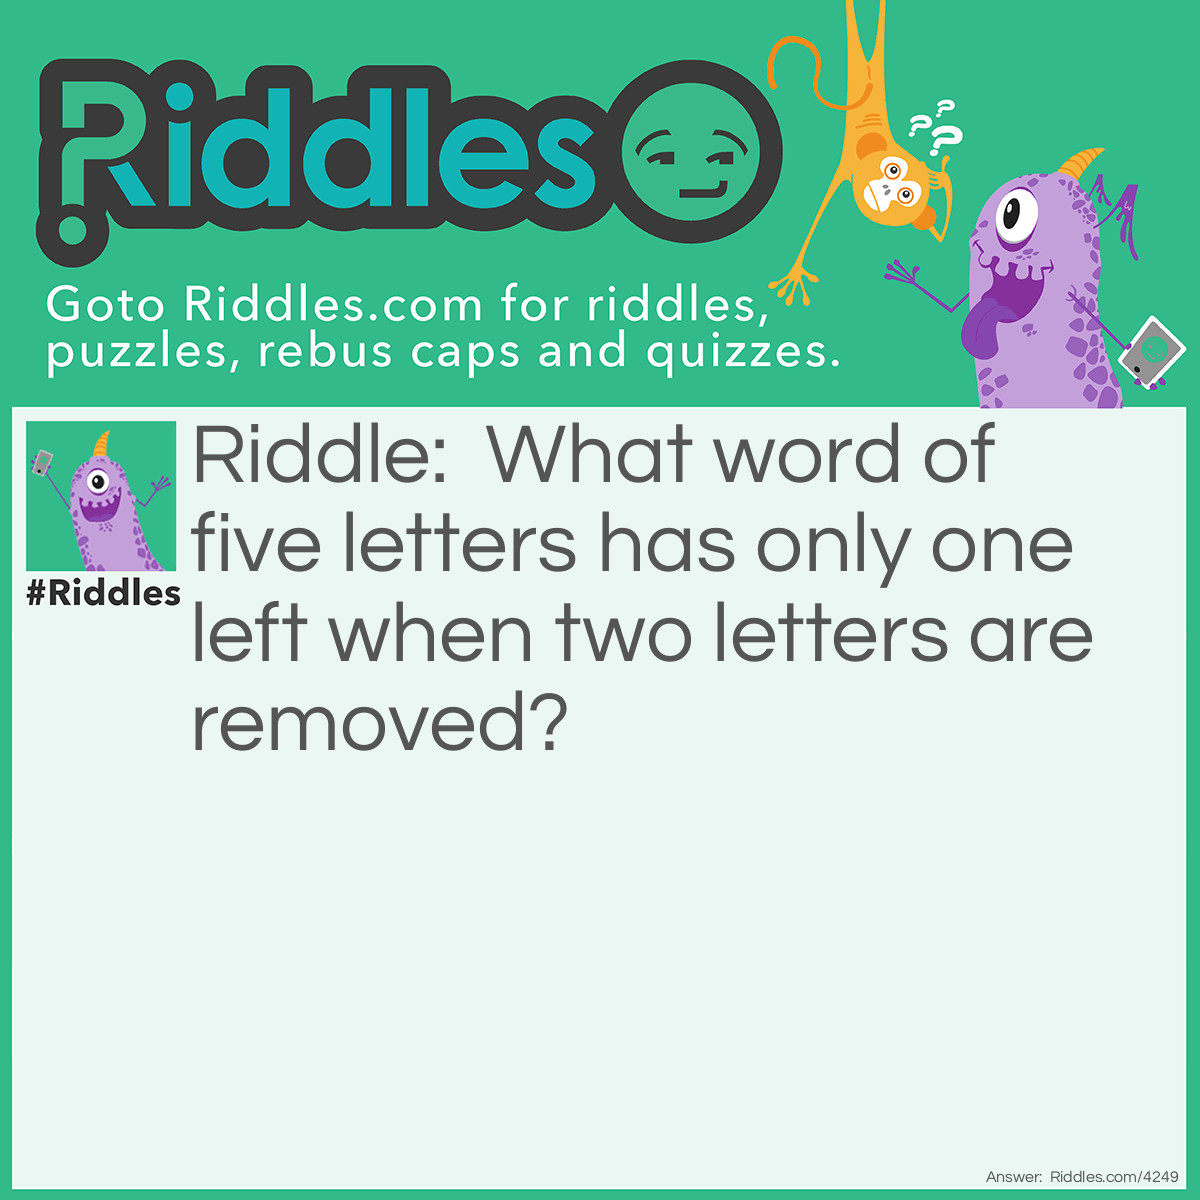 Riddle: What word of five letters has only one left when two letters are removed? Answer: Stone Remove 'St' and you're left with 'One'